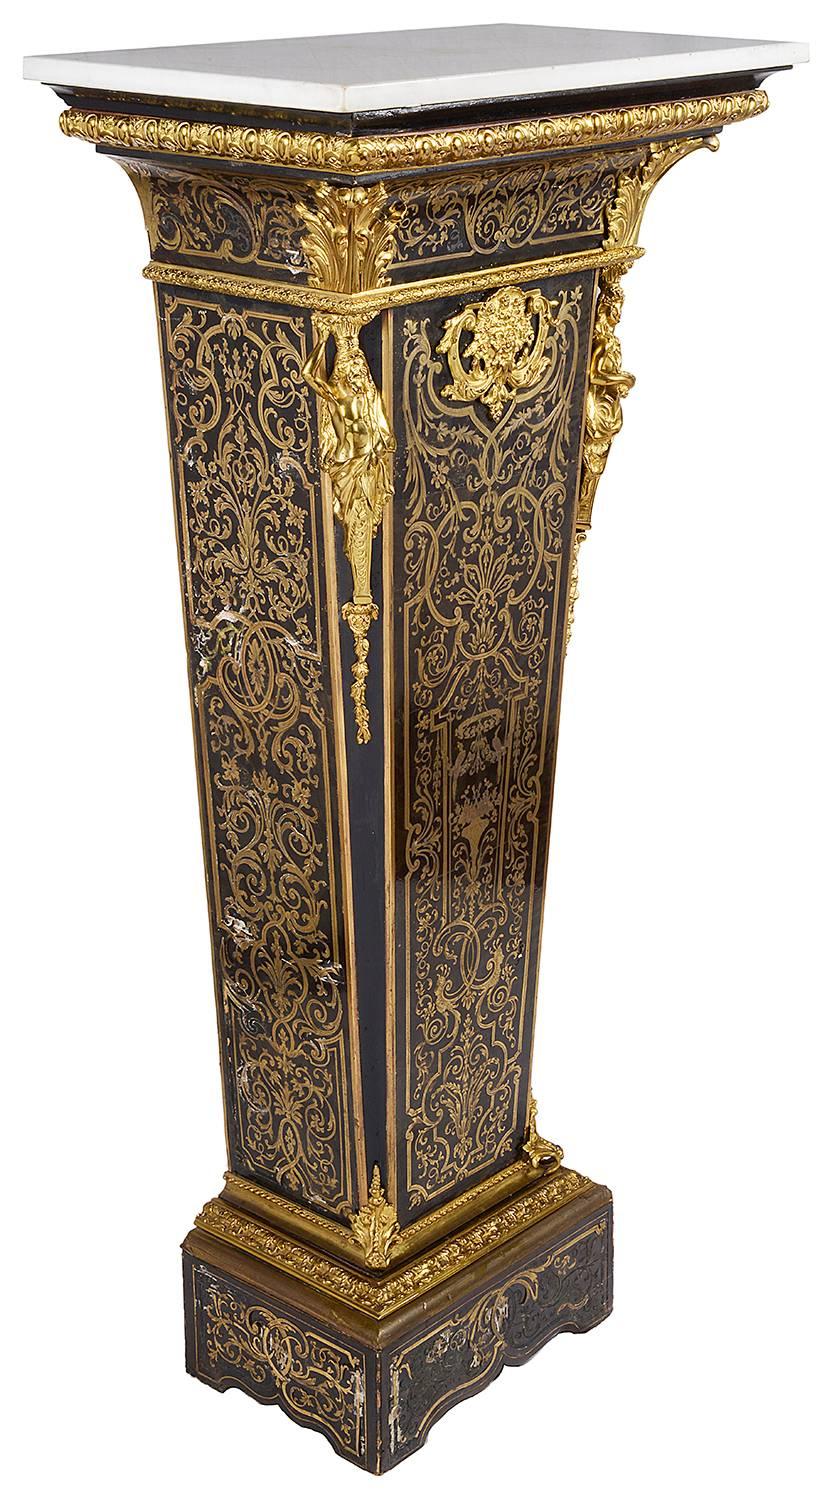 A very good quality French, 19th century Boulle inlaid pedestal, having gilded ormolu monopodia supports to either side, marble topped and a tapering form.